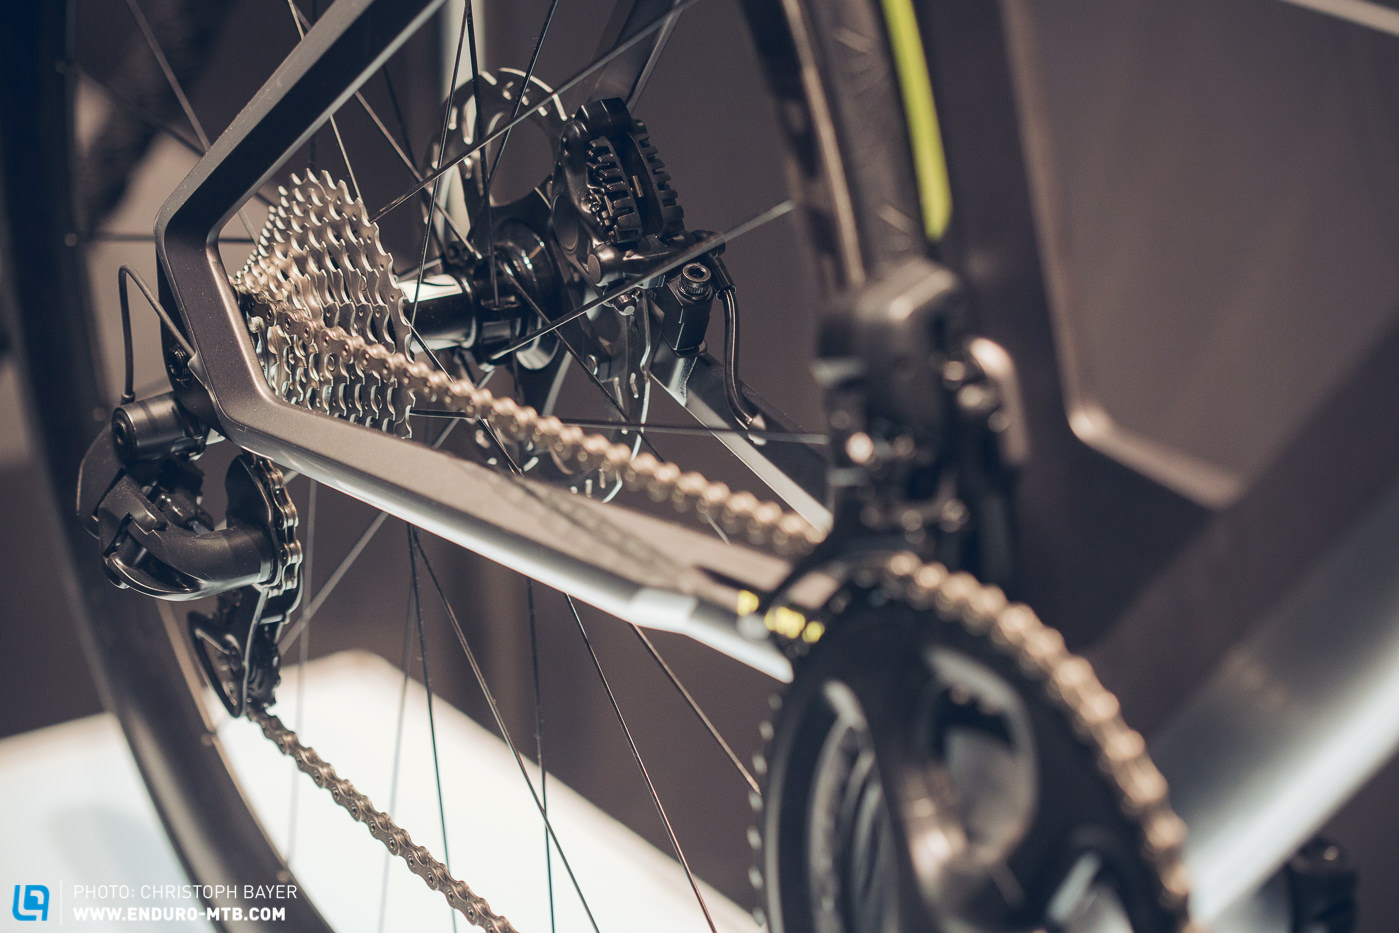 Looking ahead: Is this the future? Canyon reveal new project bike ...